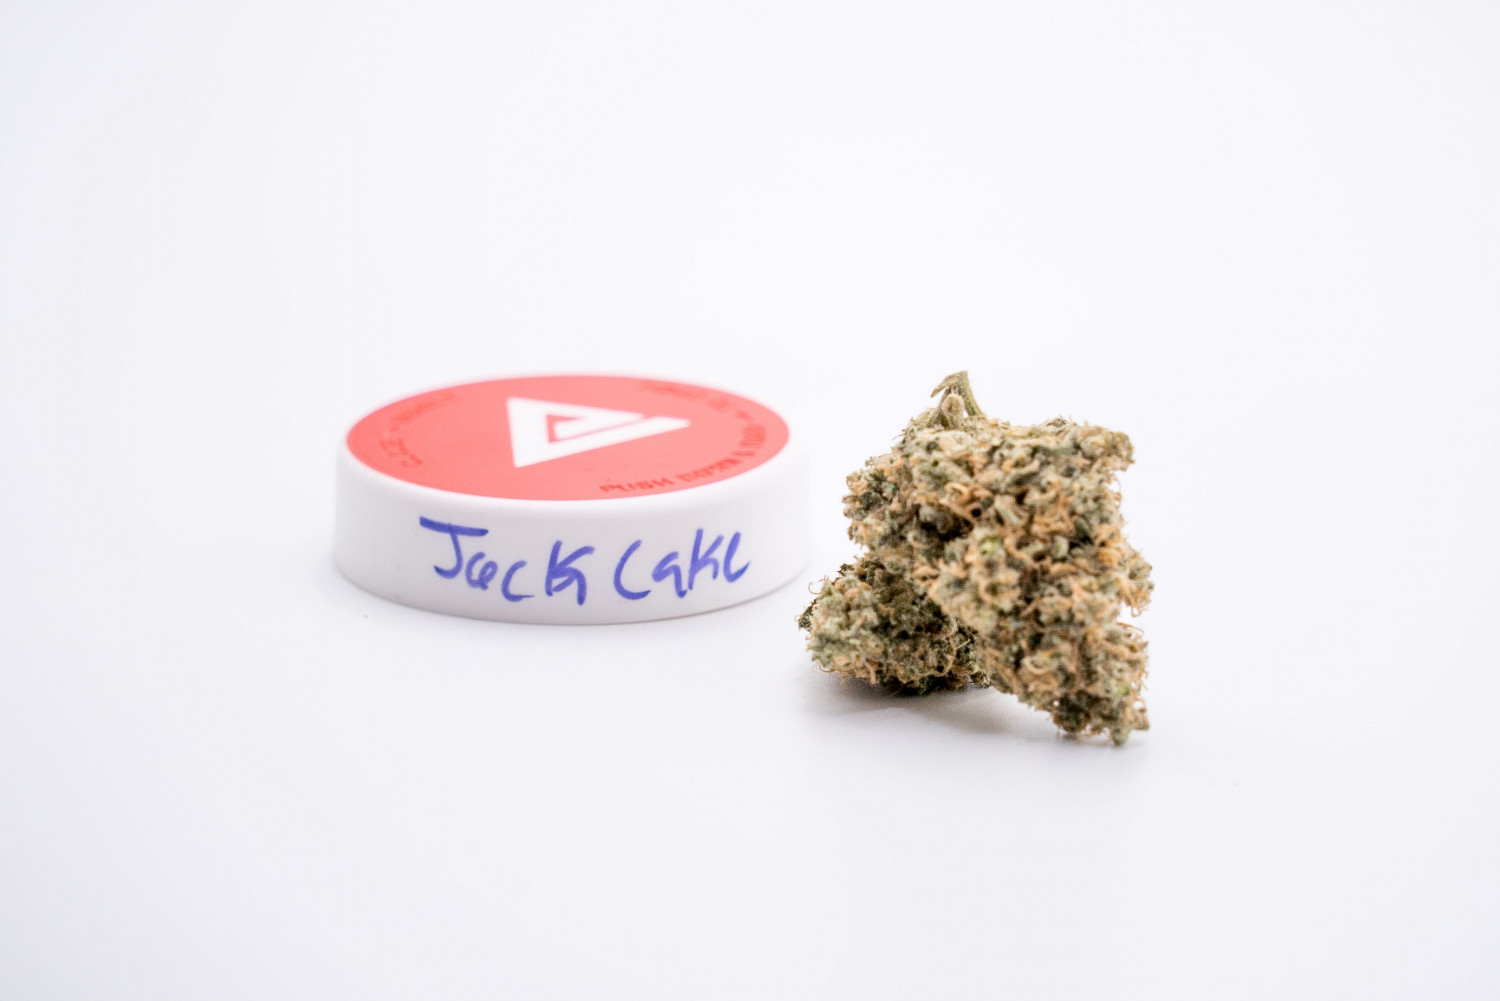 The Jack Cake Strain Review Featuring Ember Valley From Redding, California